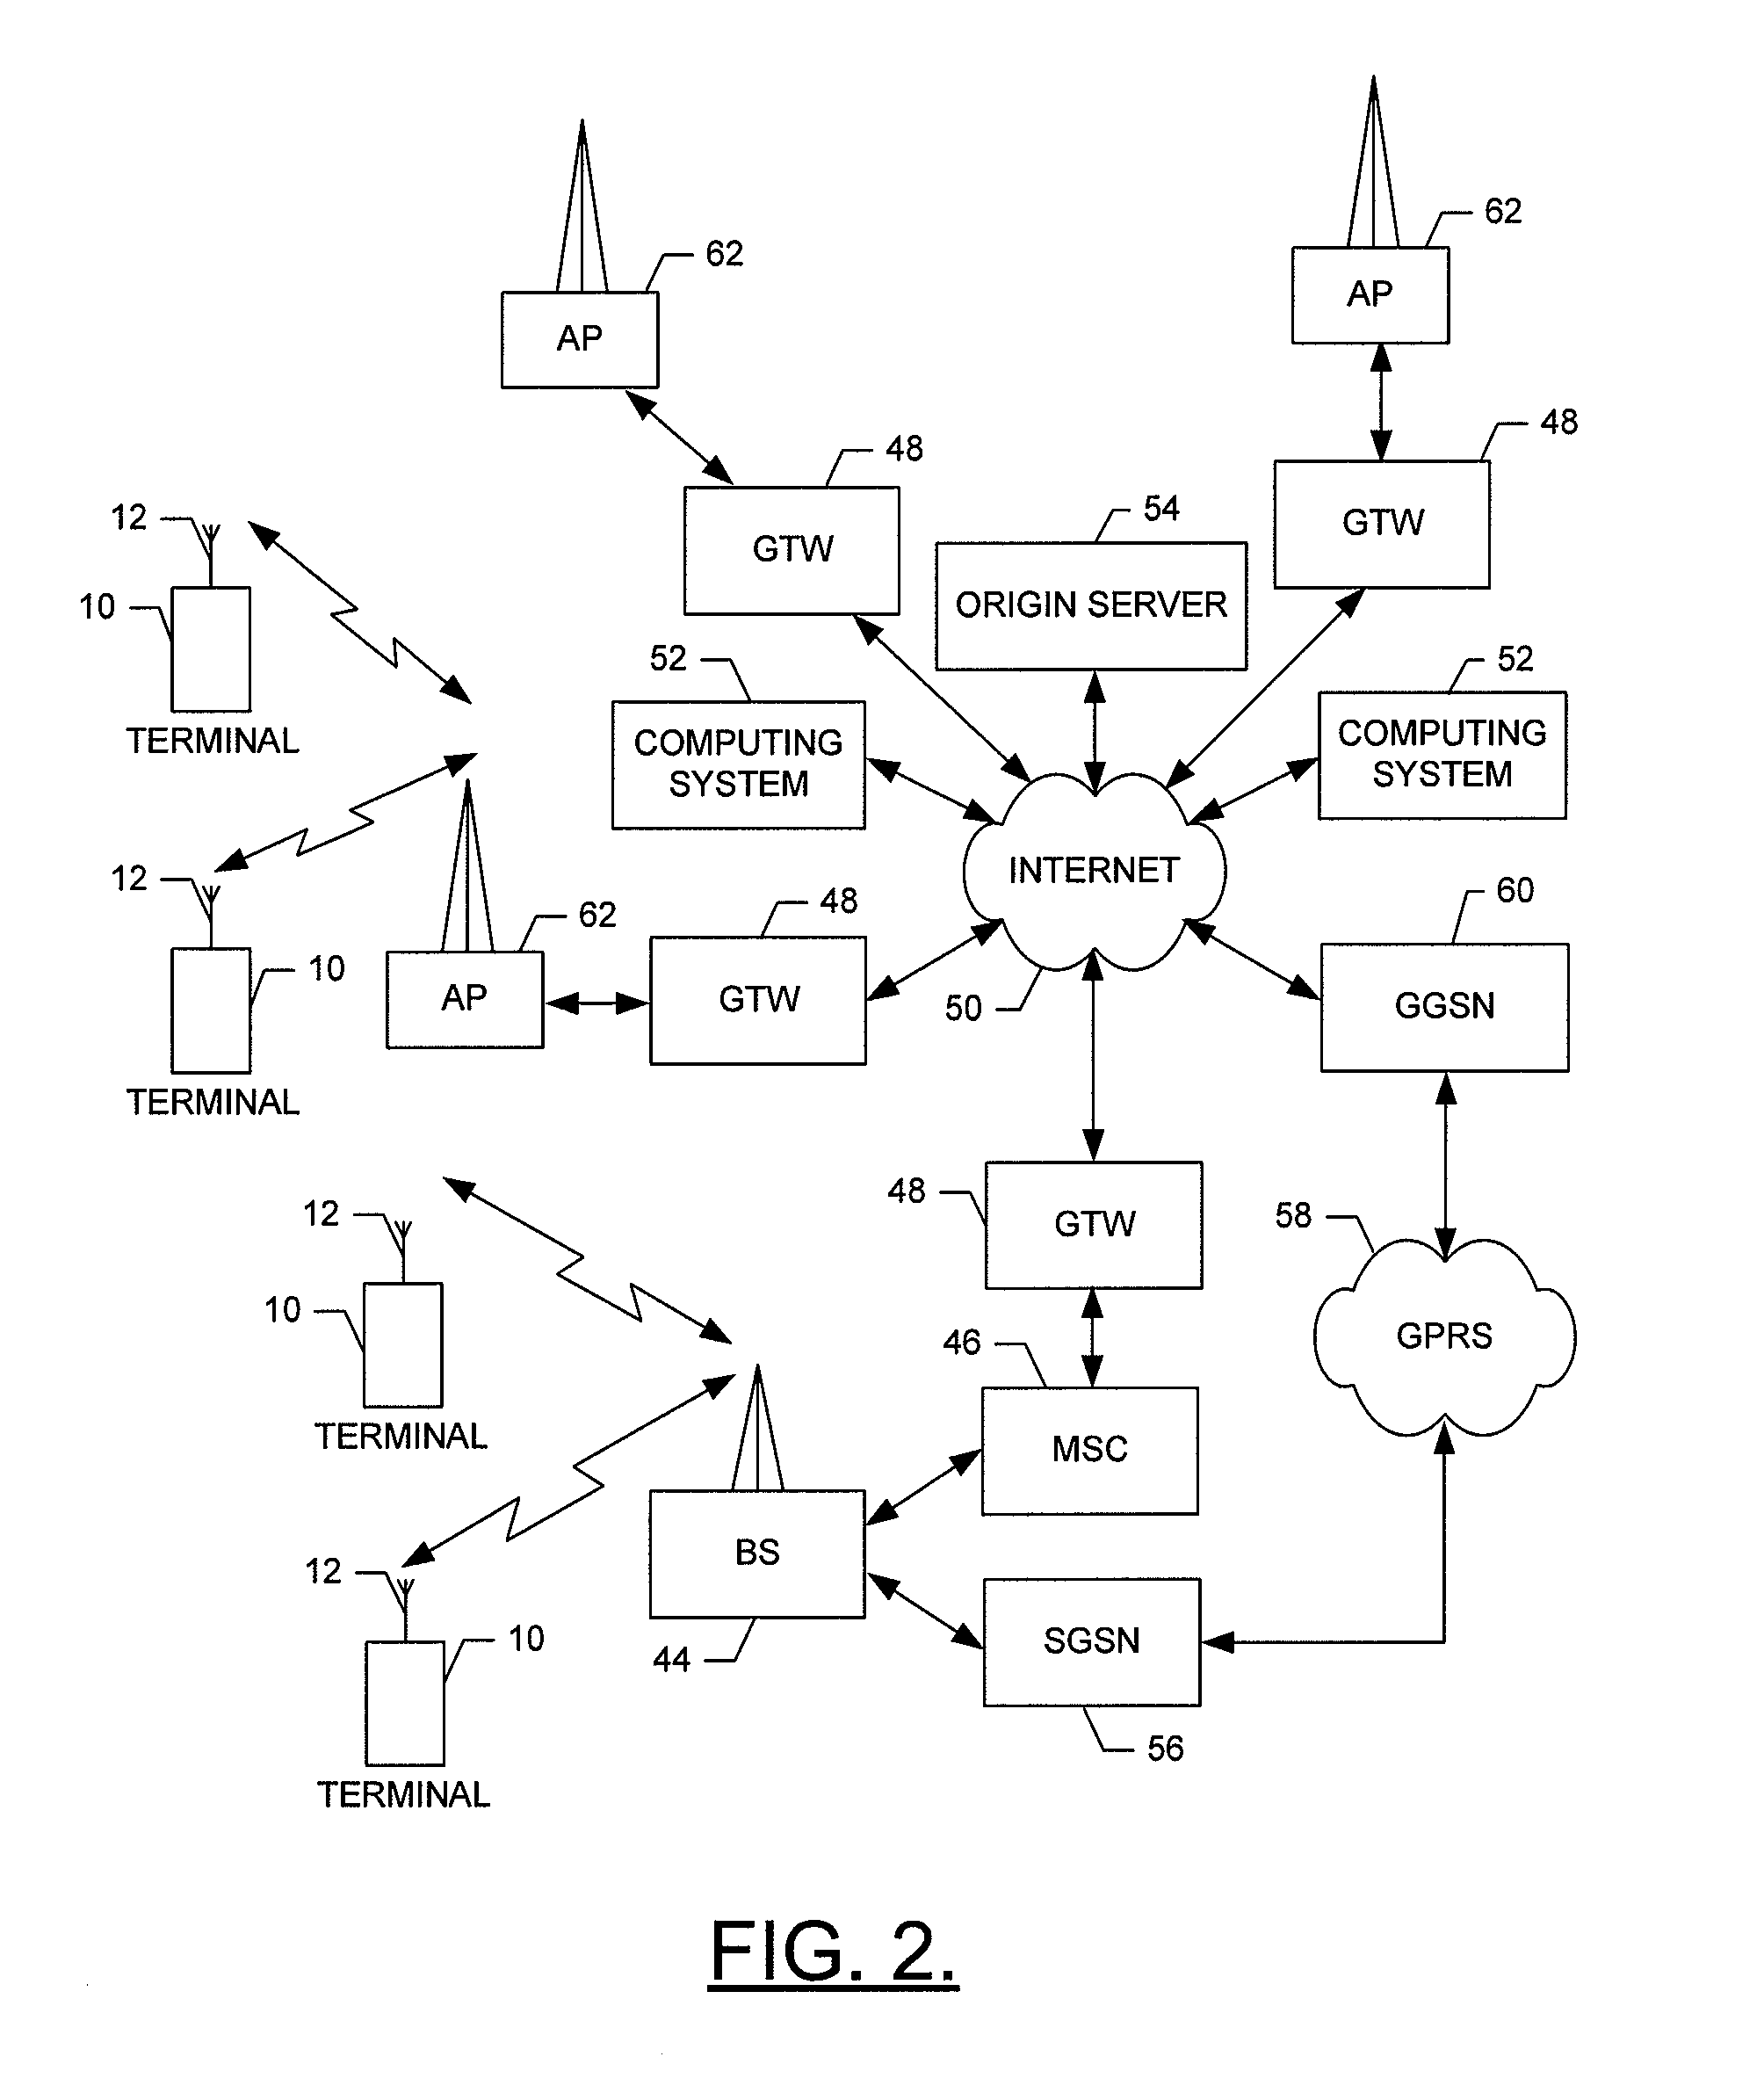 Method, Apparatus and Computer Program Product for Providing a Language Based Interactive Multimedia System